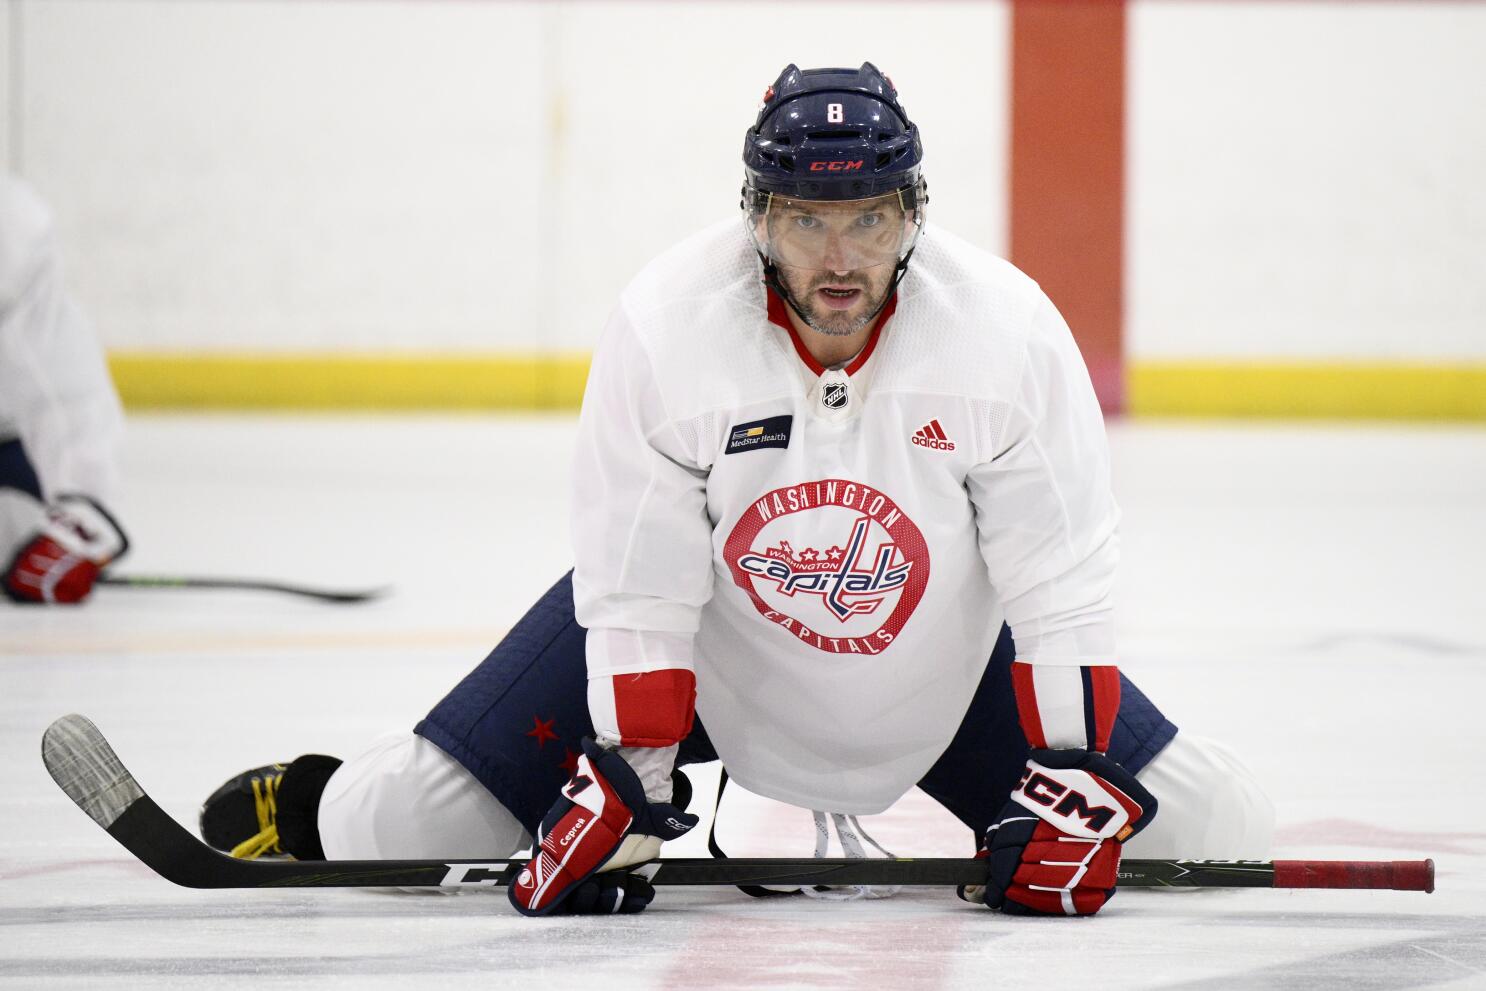 Capitals season preview: Aging core must stay healthy